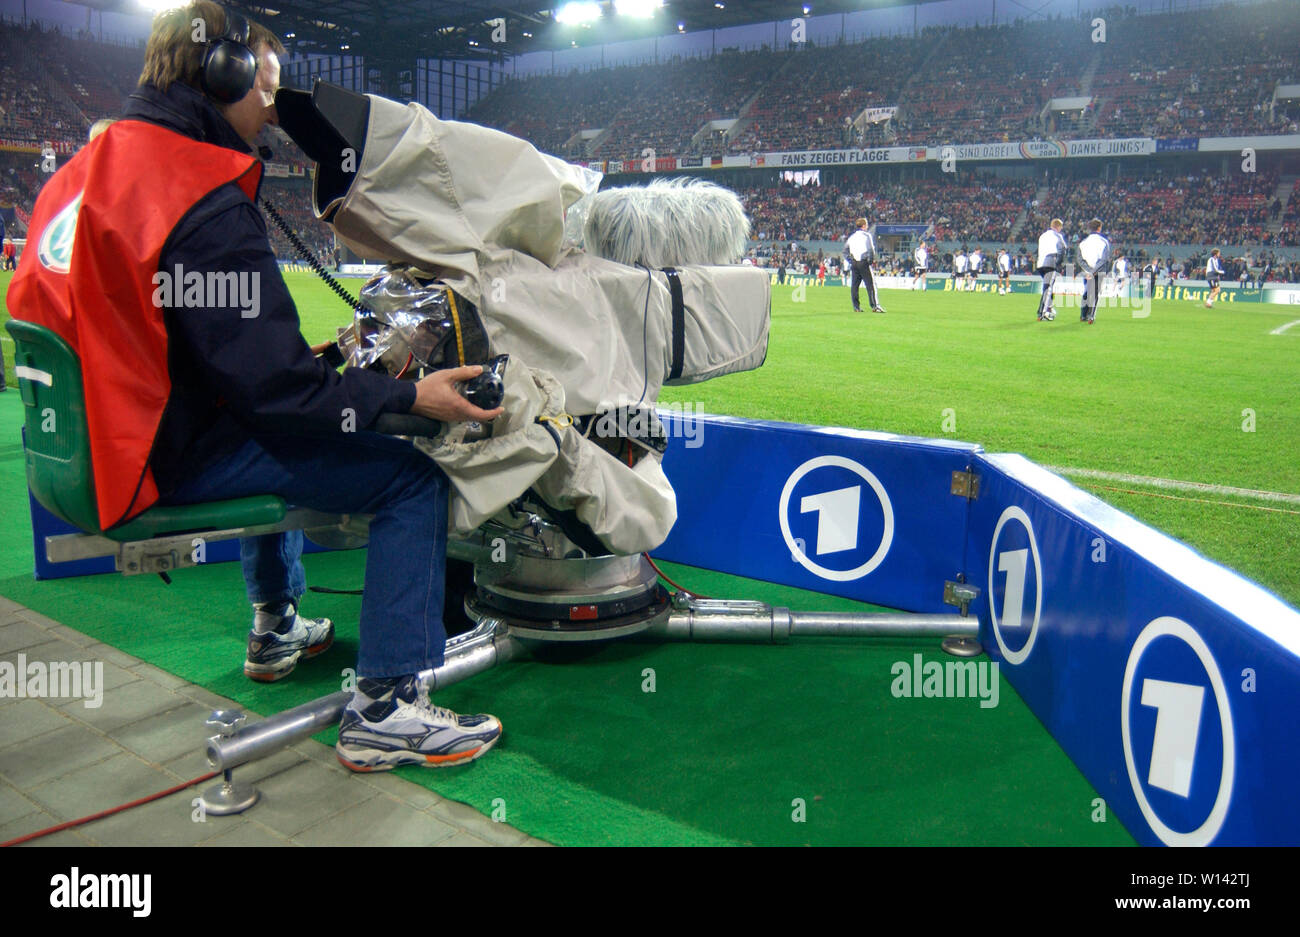 Rhein-Energie-Stadion Cologne Germany, 31.3.2004, Football: International friendly, Germany (white) vs. Belgium (red) 3:0 --- TV cameraman of the German Television channel 'Das ERSTE' (ARD) on the sidelines of the pitch Stock Photo